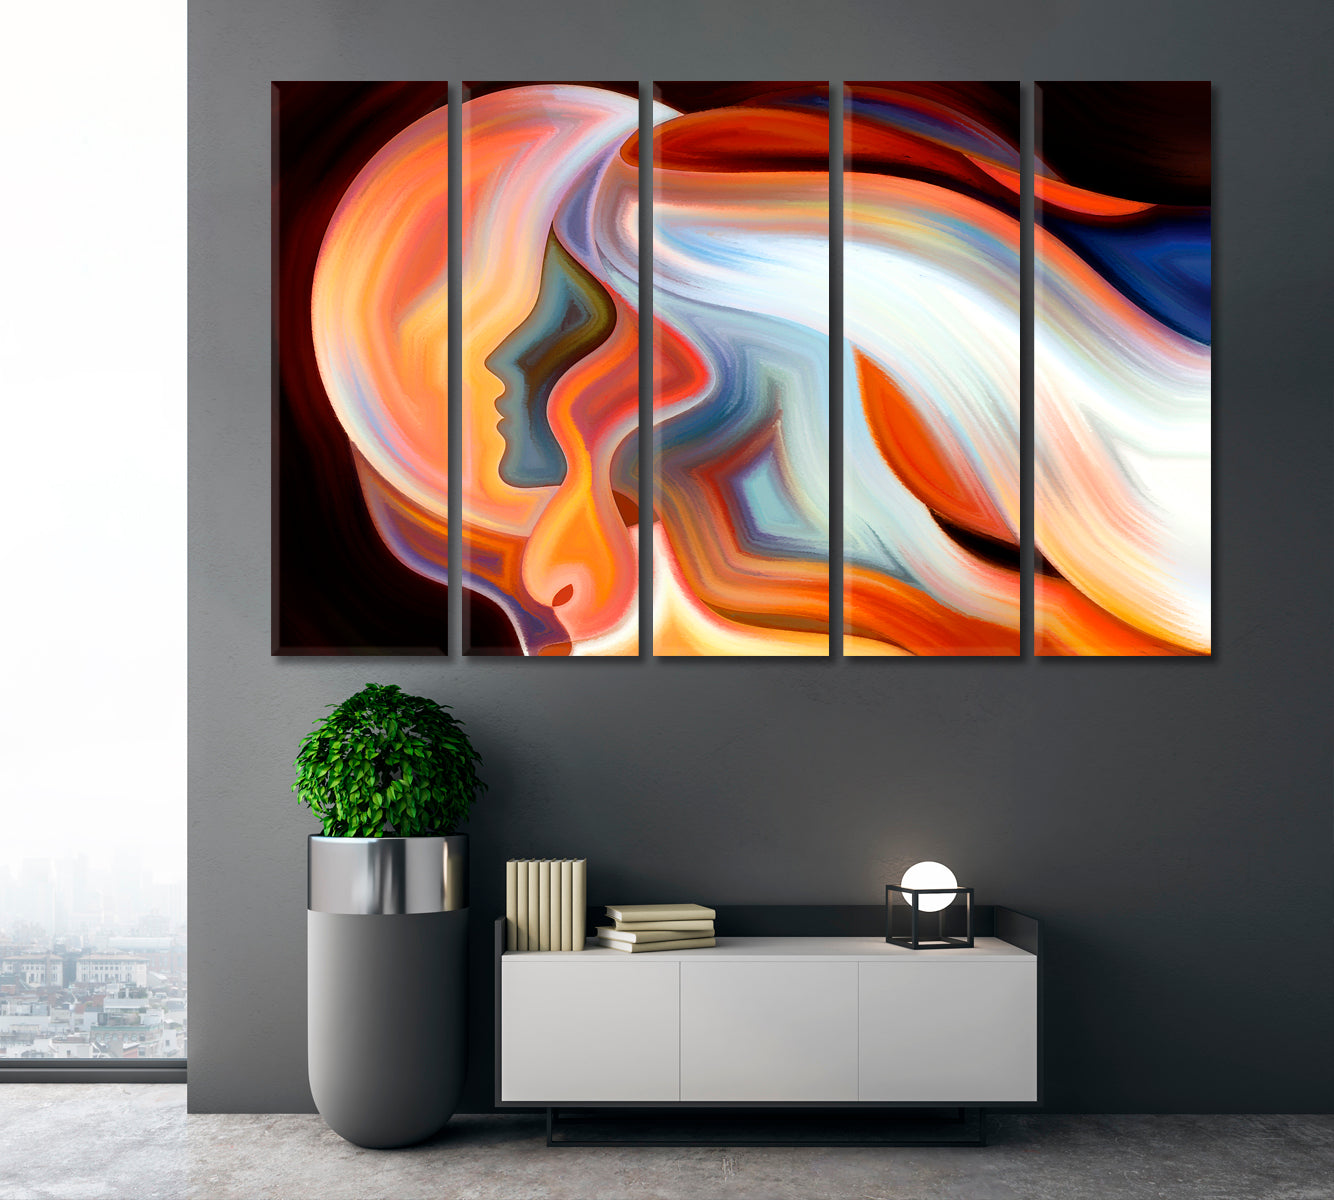 Human Moon Emotion and Spirituality Abstraction Celestial Home Canvas Décor Artesty 5 panels 36" x 24" 